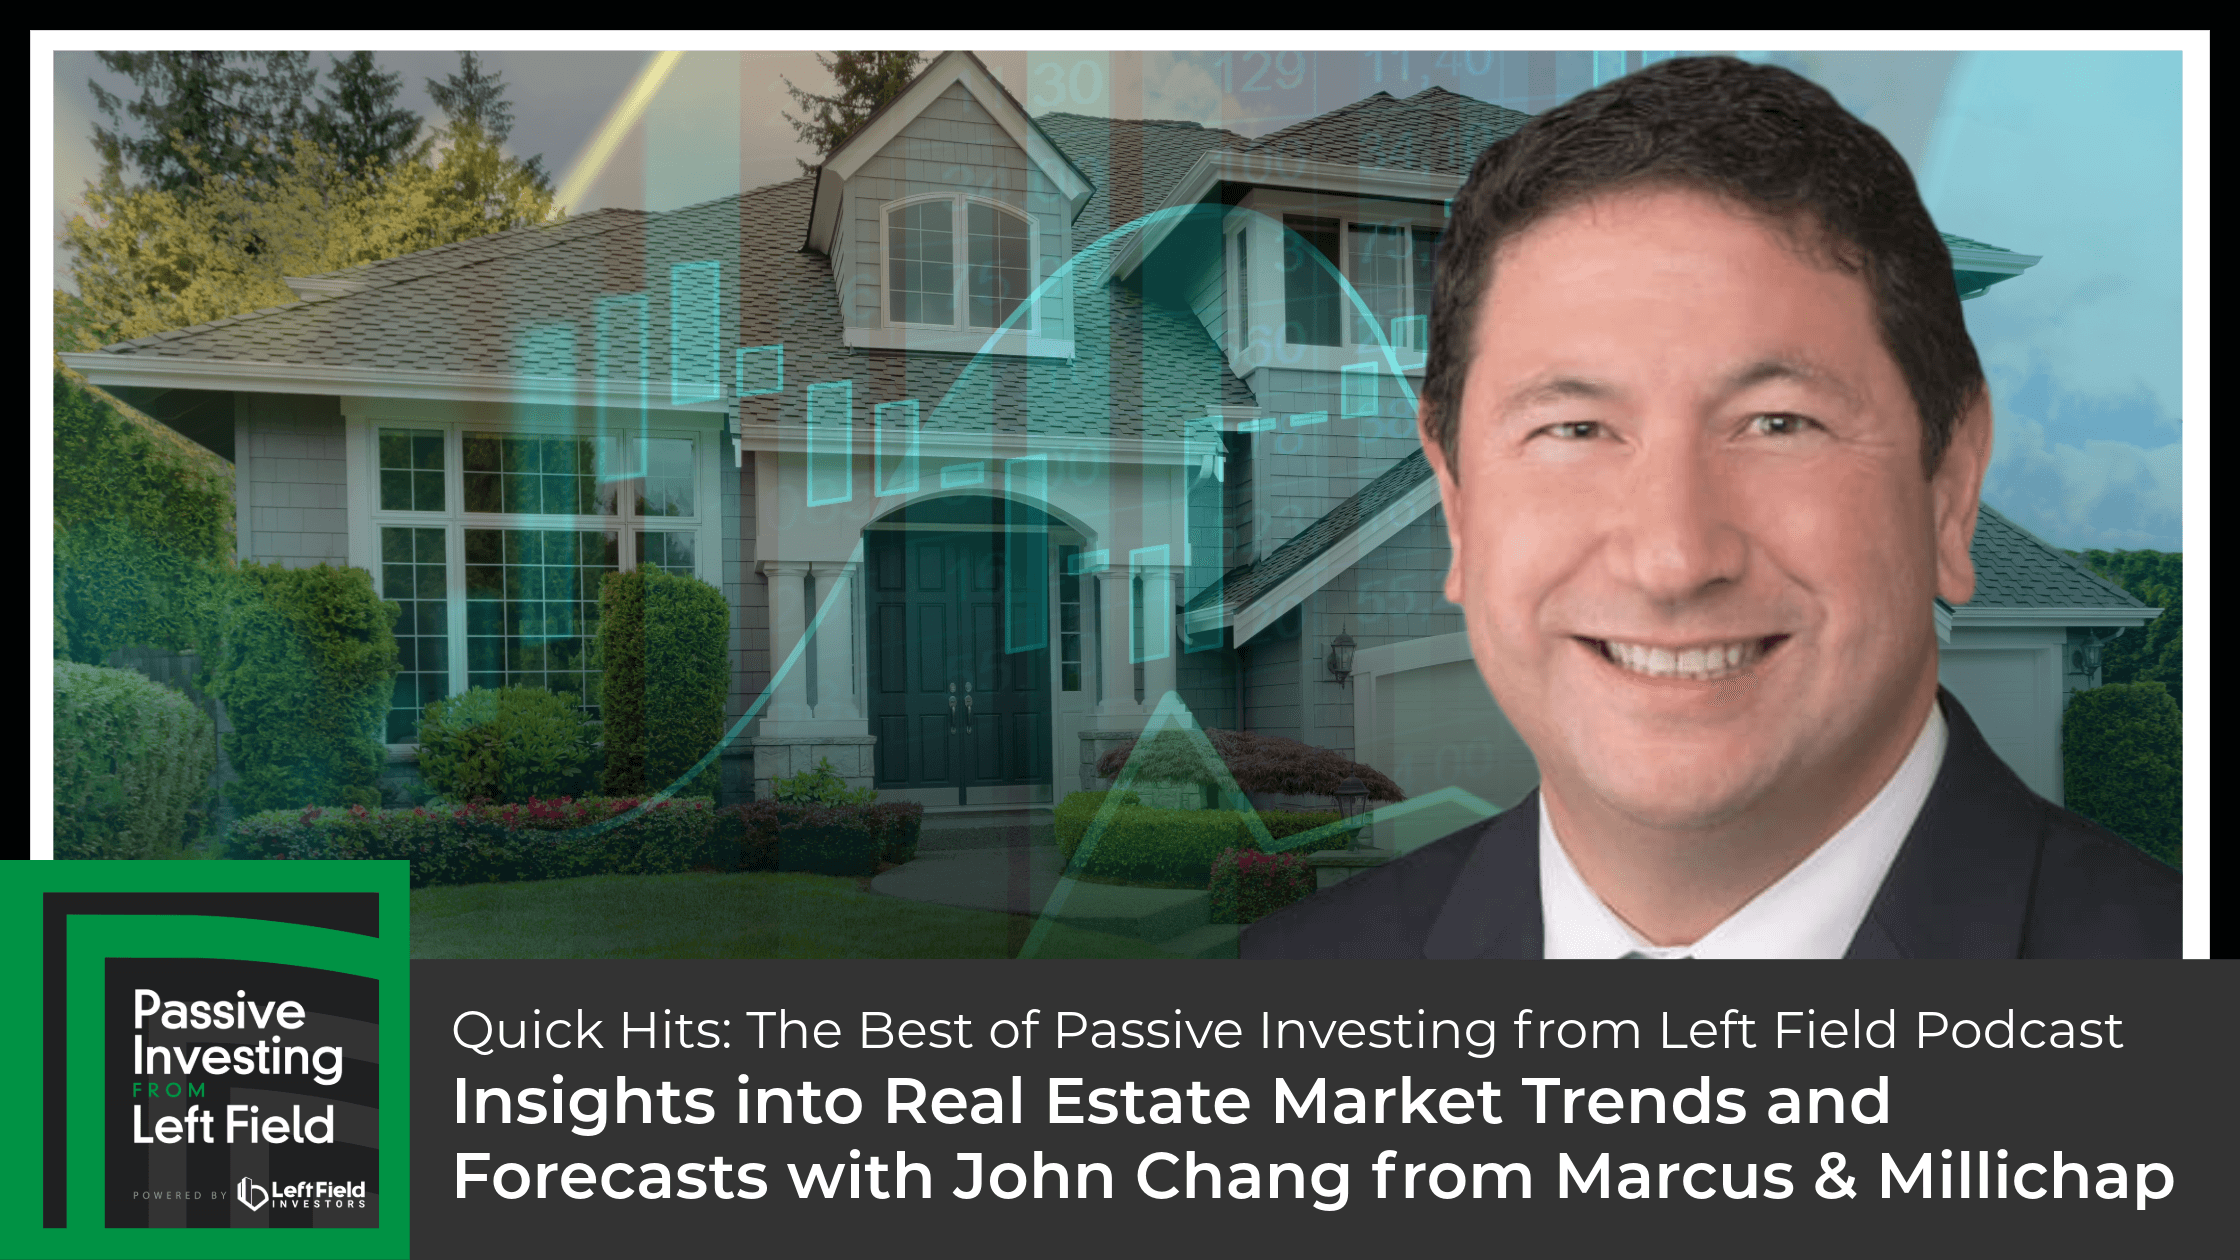 John Chang's headshot in front of a two-story house